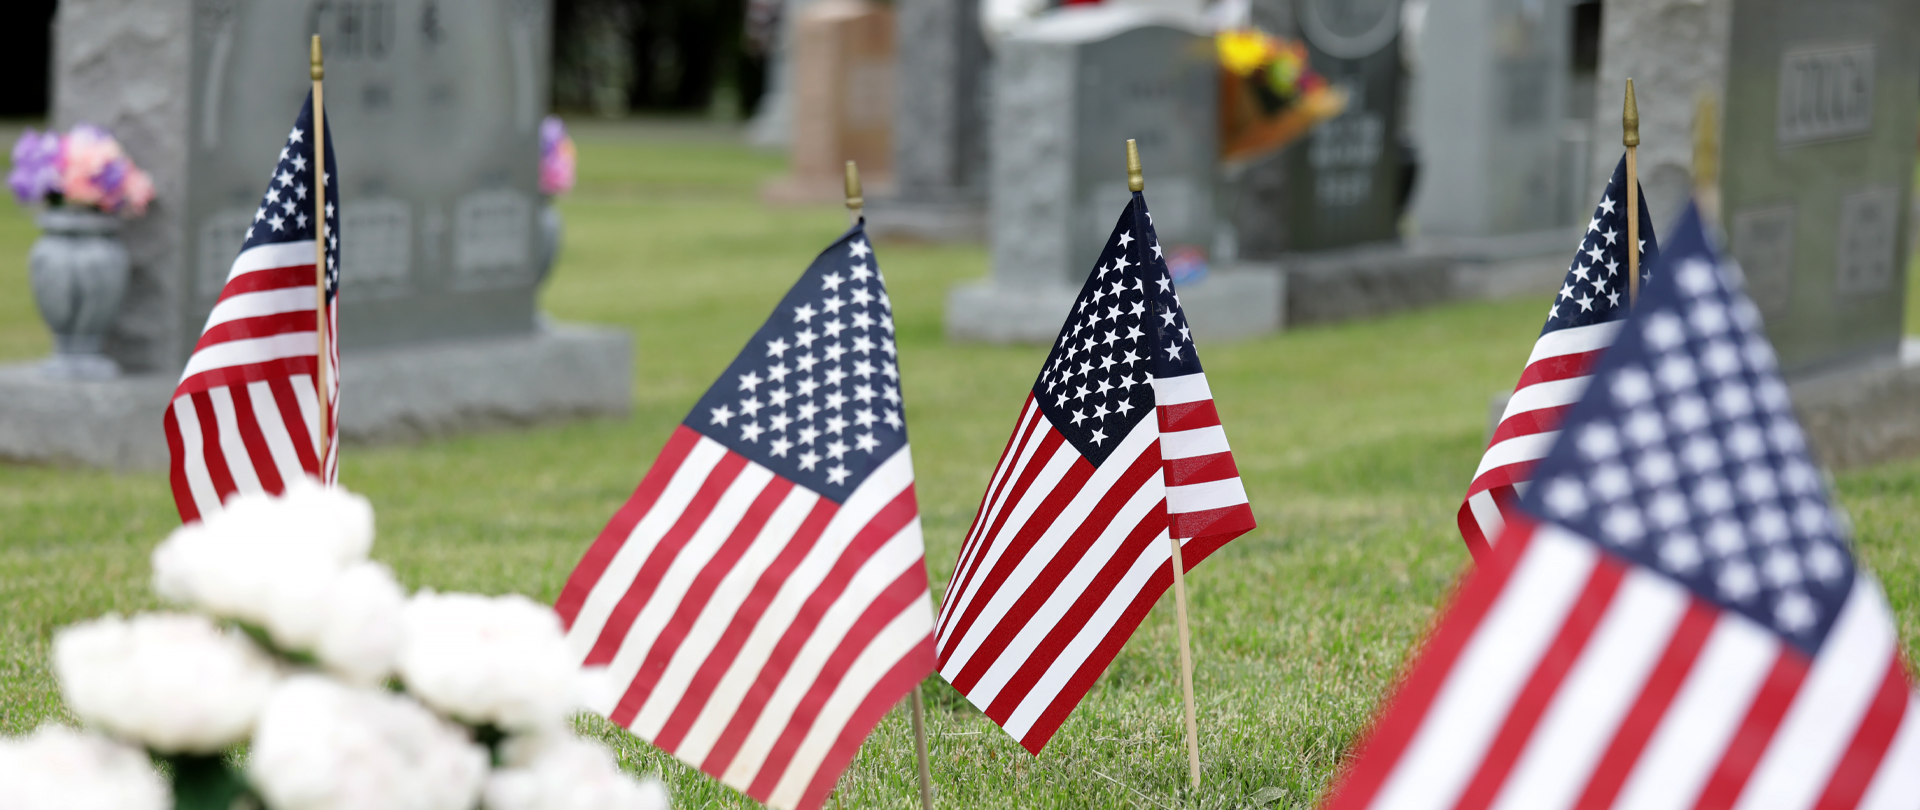 Memorial Day Flag Ceremony
Wednesday, May 24 at 3:00 PM
Magnolia Memorial Gardens
